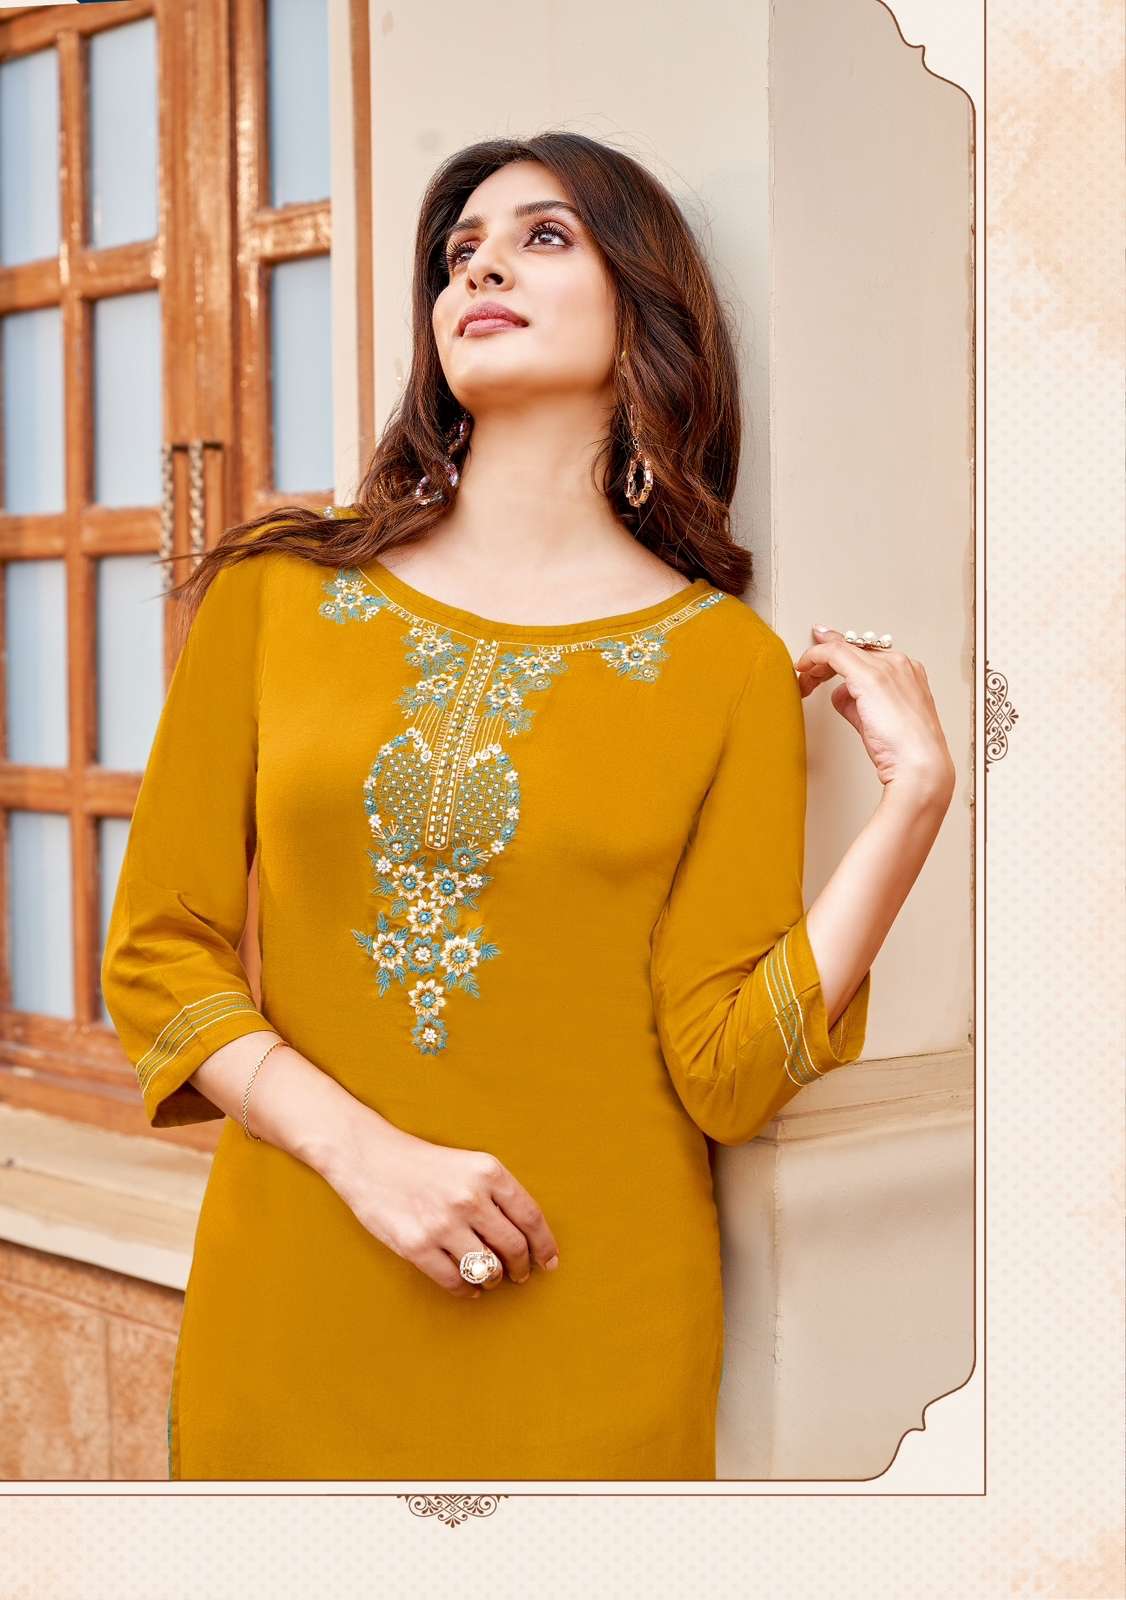 Celebrating in Style: The Latest Trends in Stylish Kurti Designs